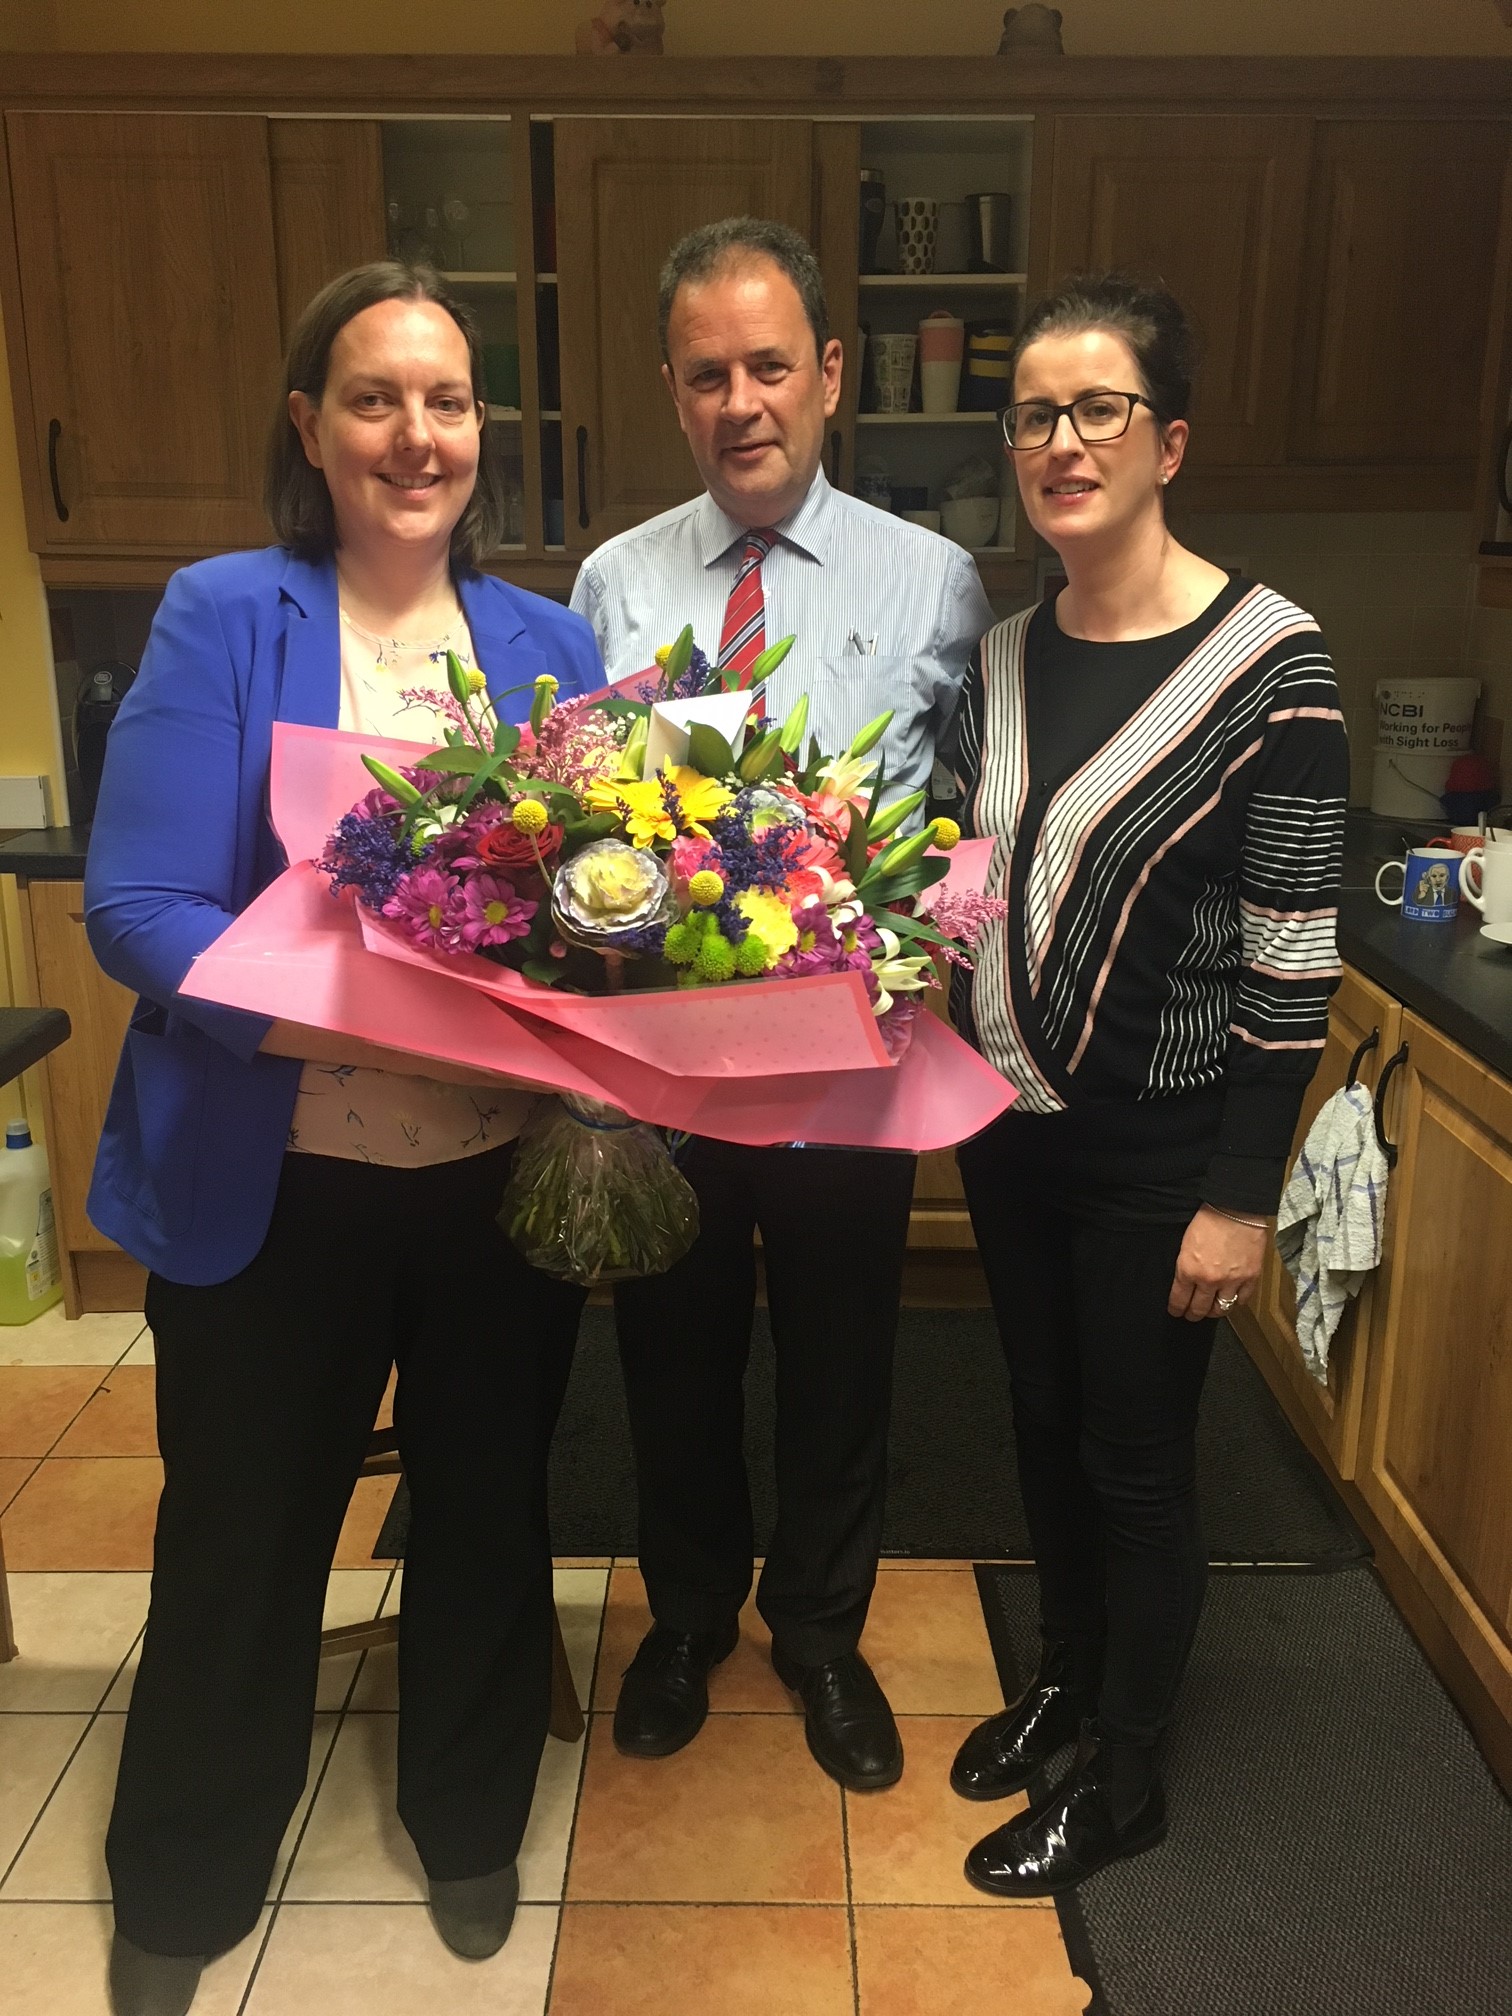 Image of Fionnuala, Ruairi and Niamh Connolly with flowers